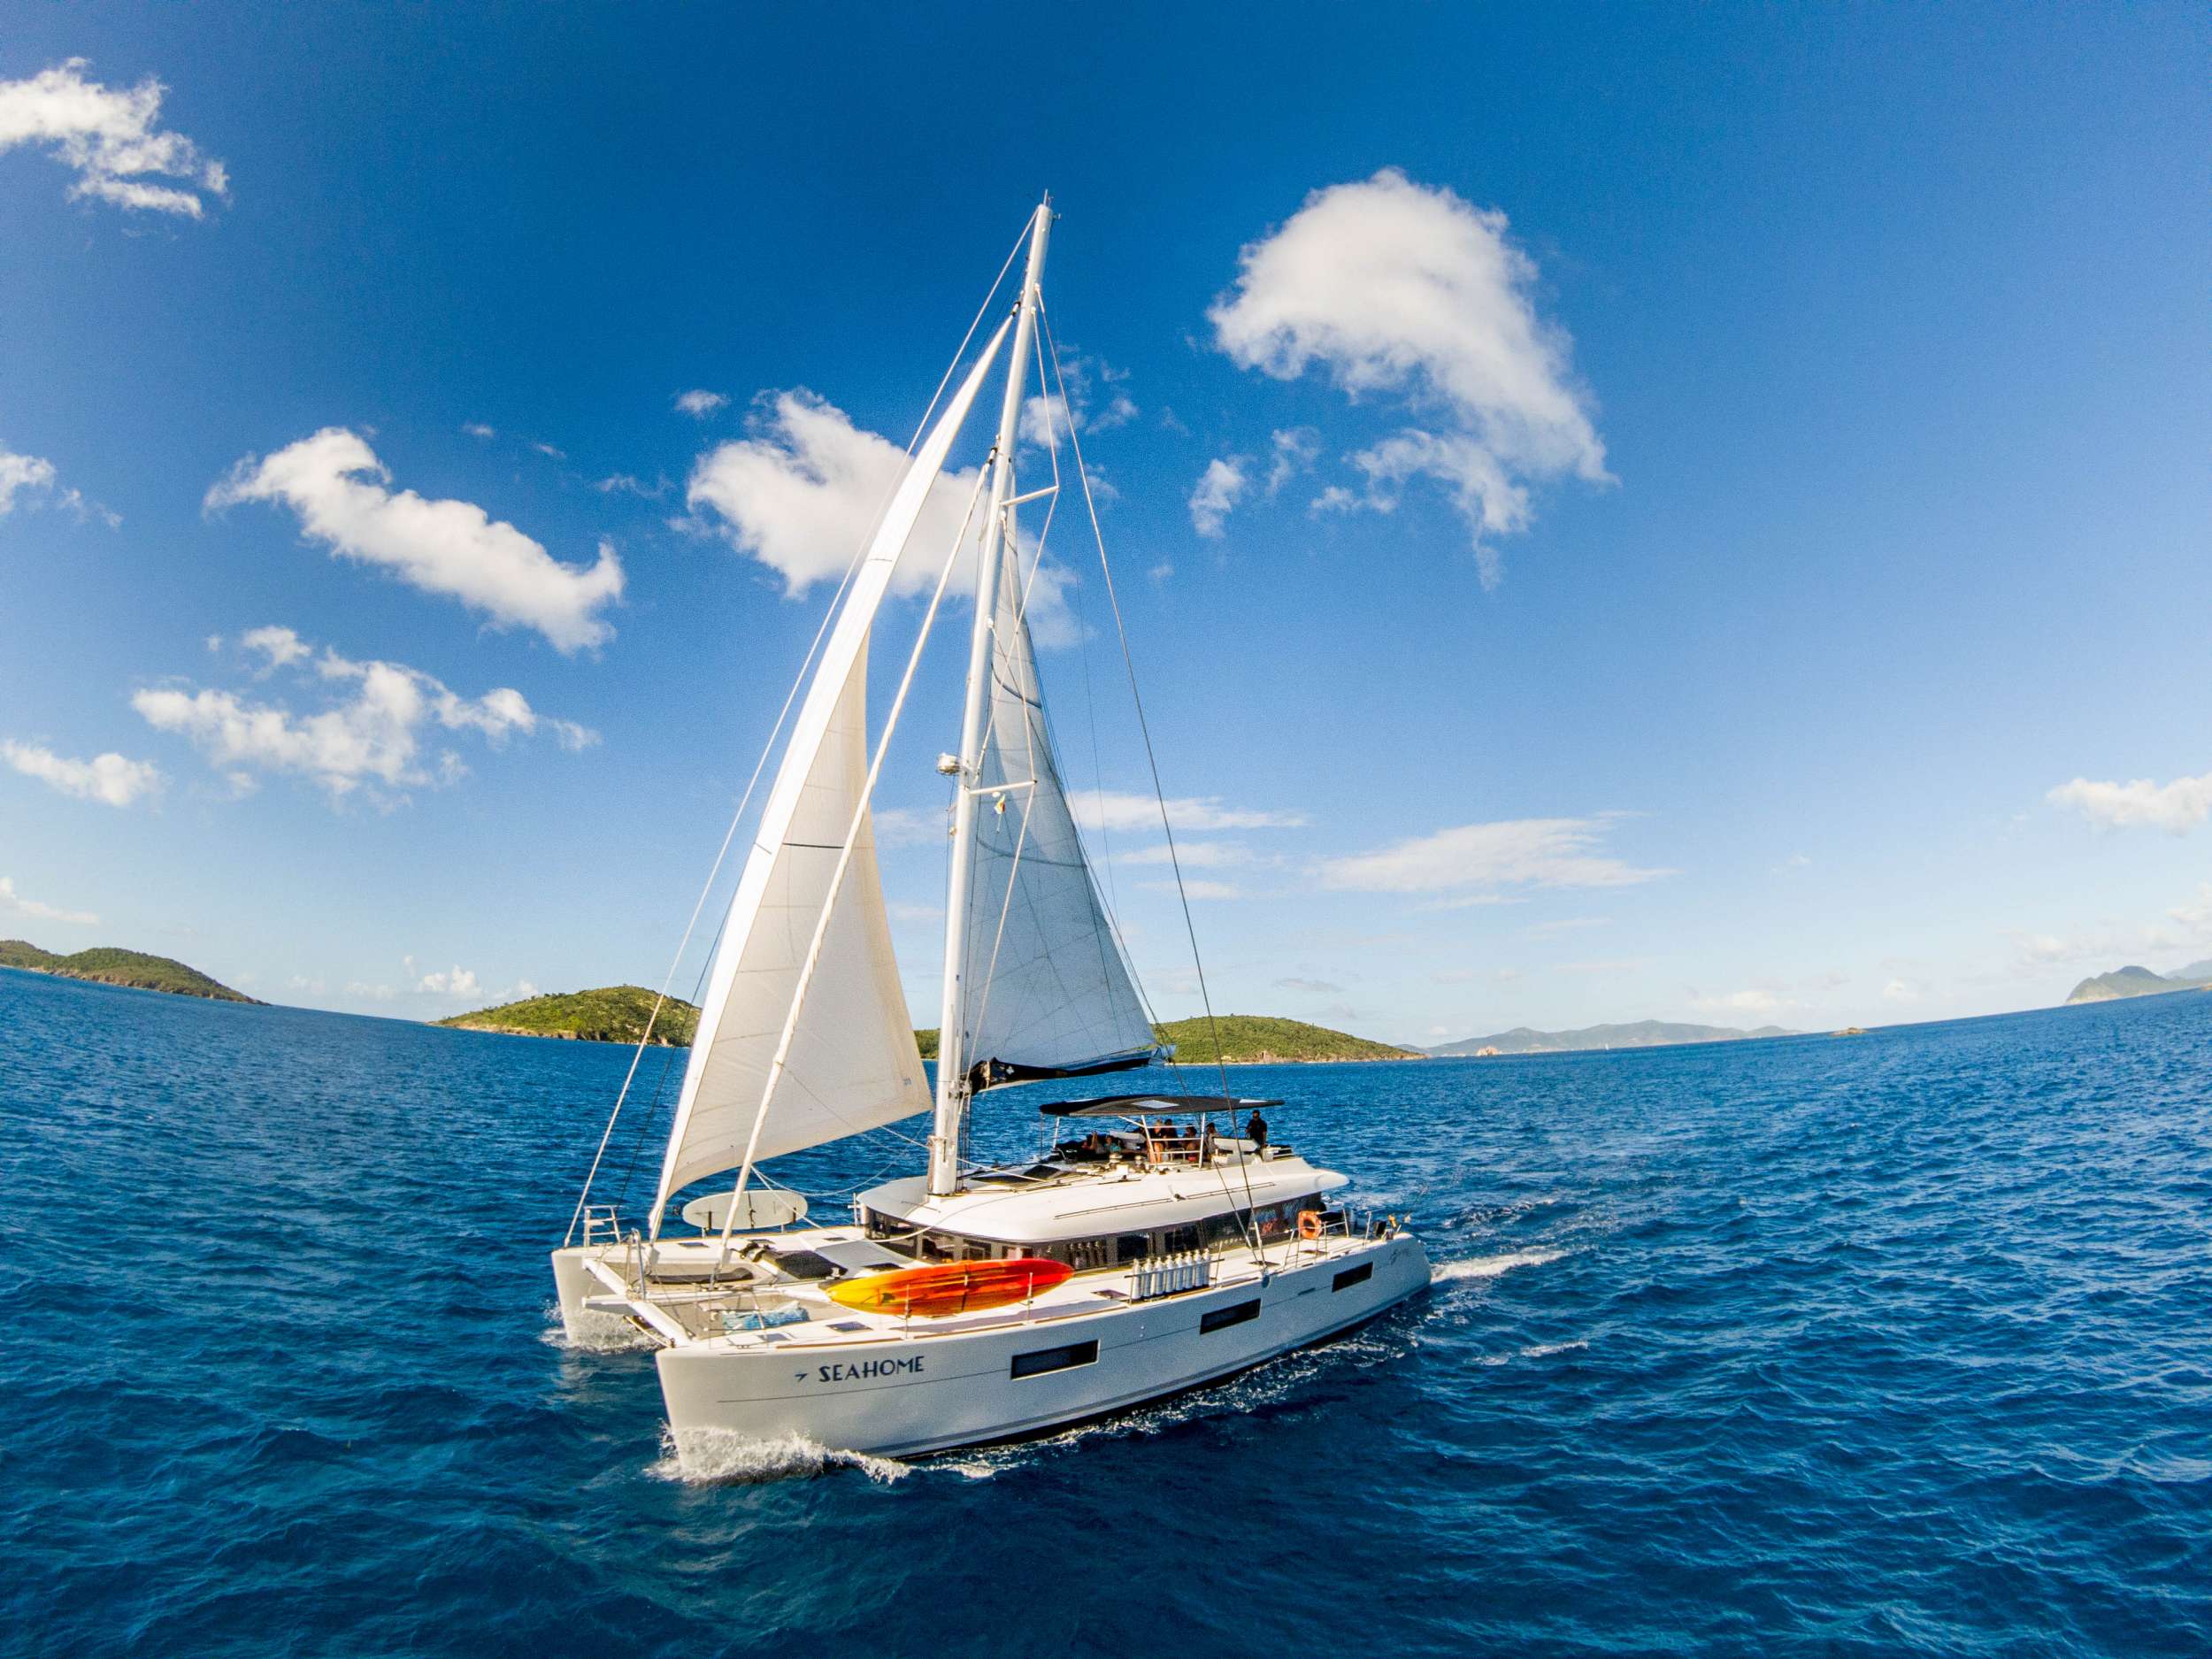 seahome - Luxury yacht charter St Martin & Boat hire in Caribbean 1